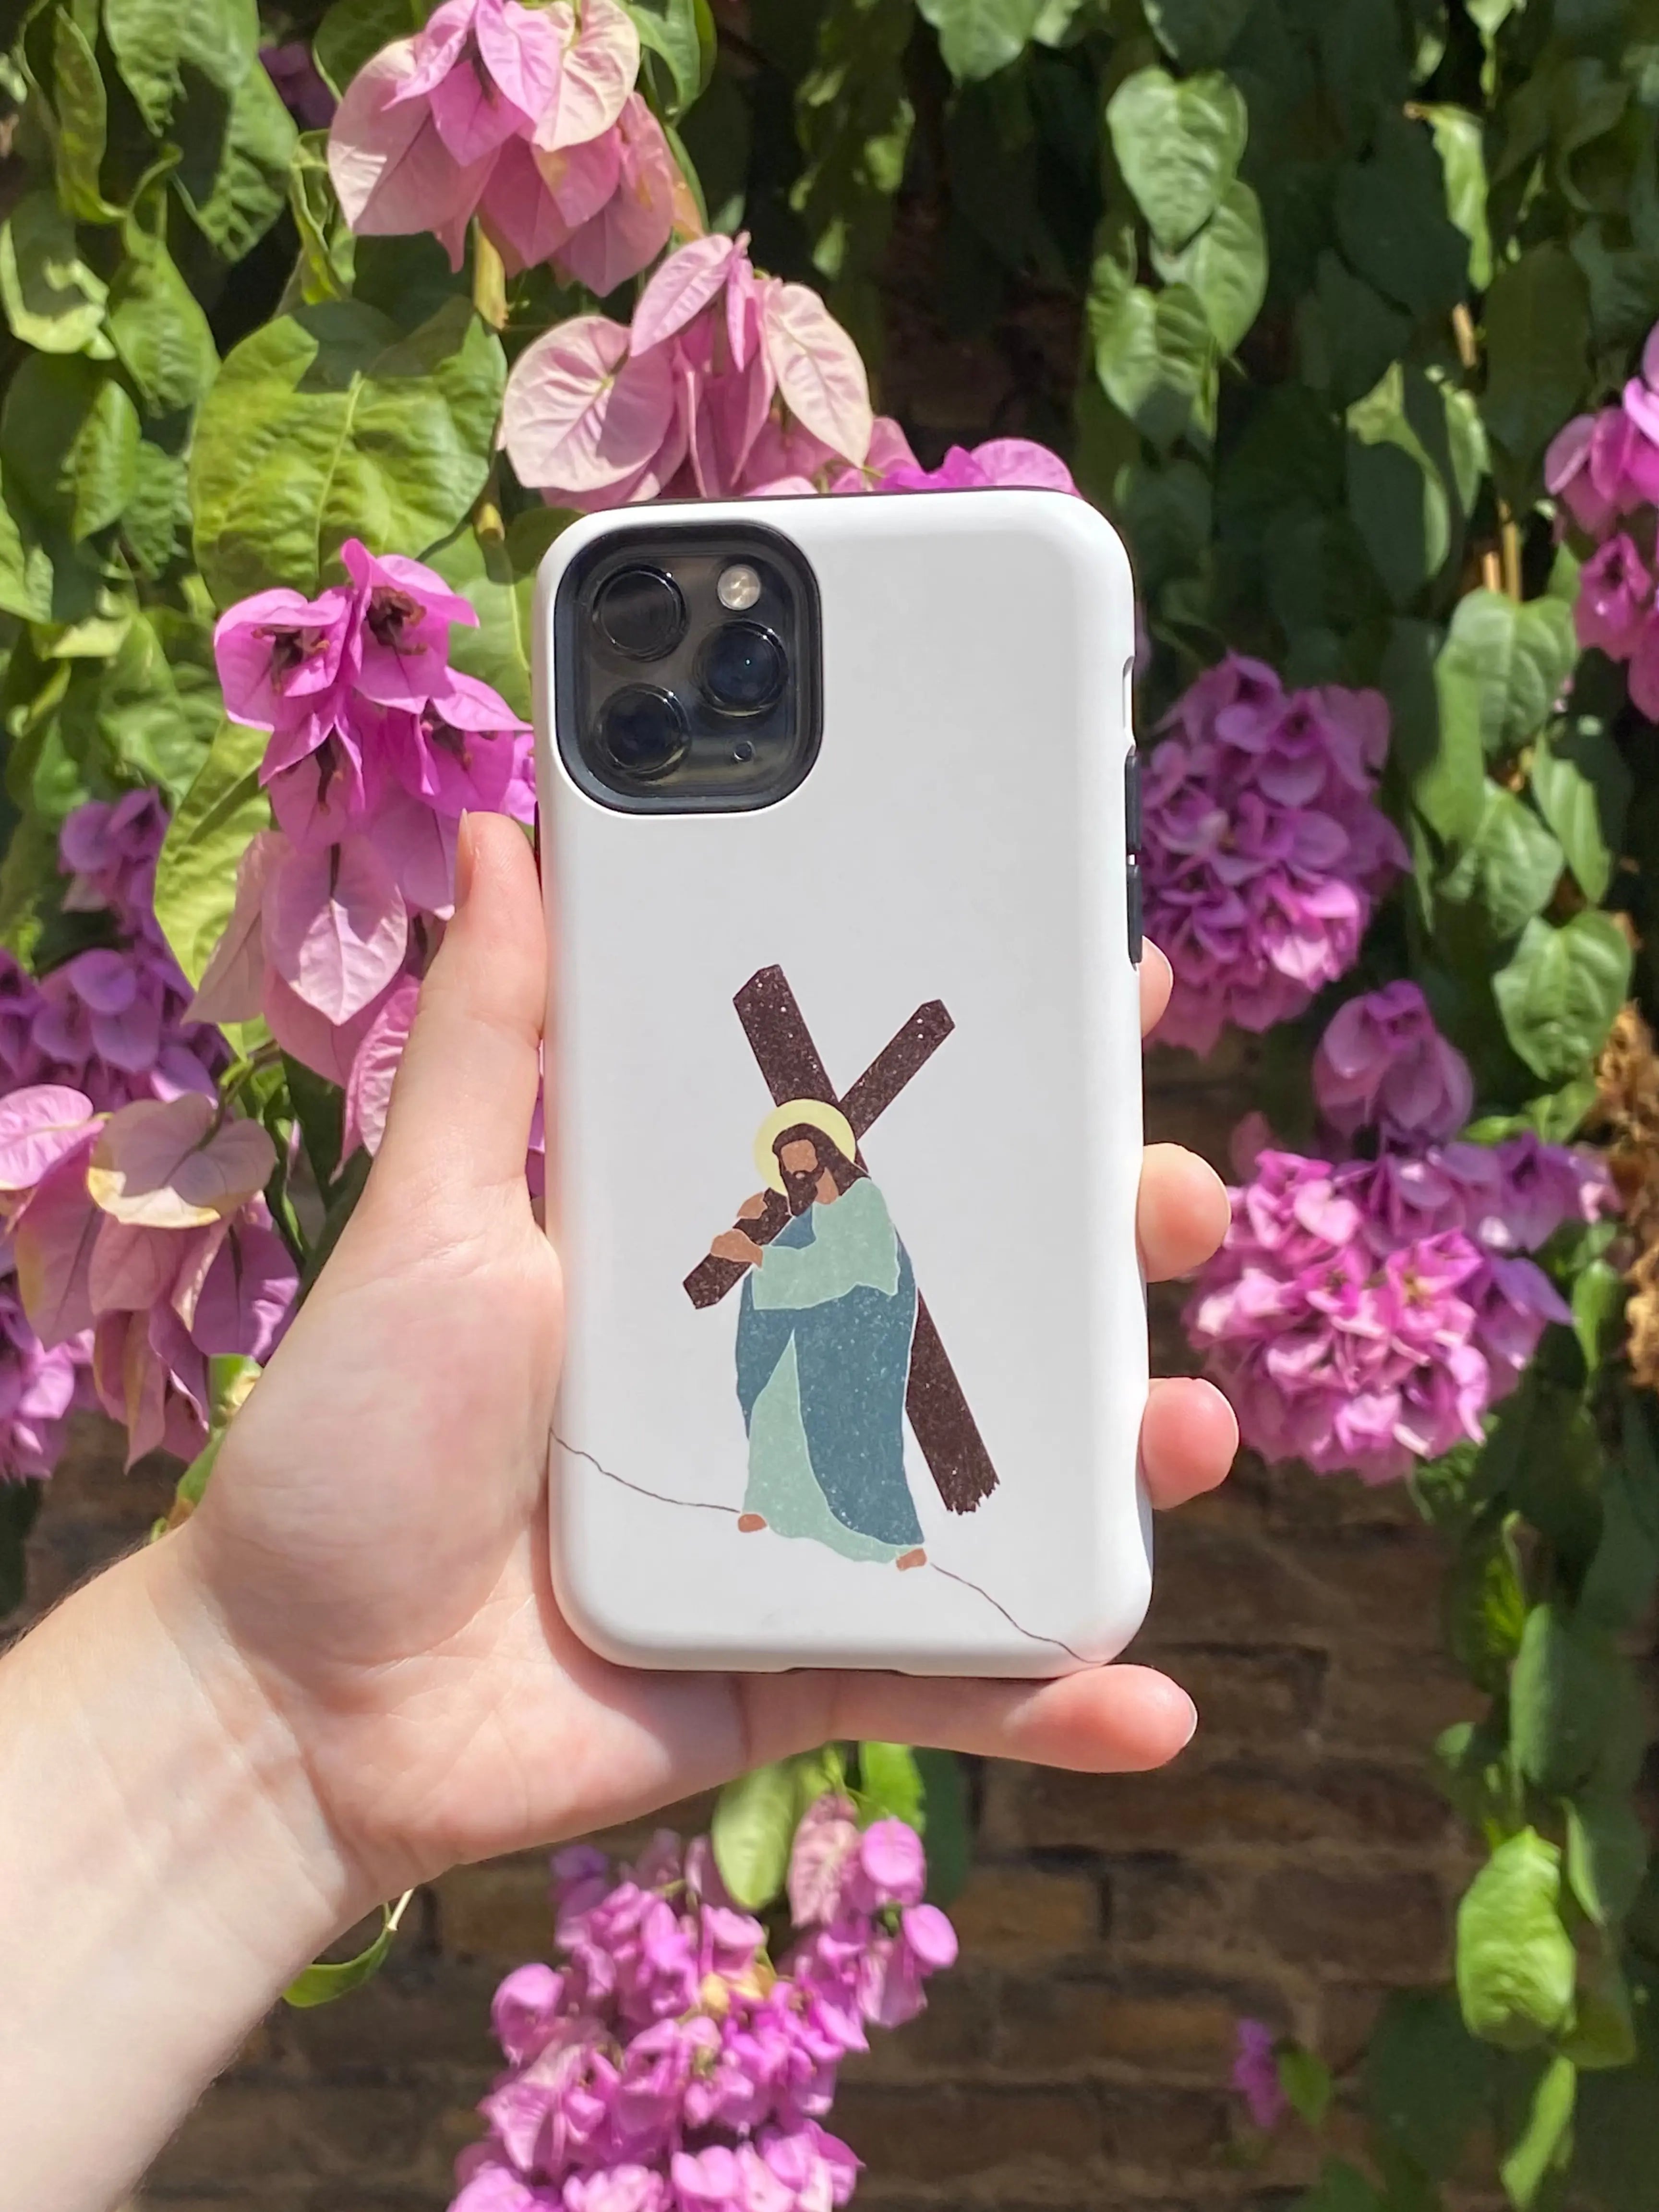 Close-up of a Christian iPhone case featuring a graphic image of Jesus with the cross on a bright floral backdrop.